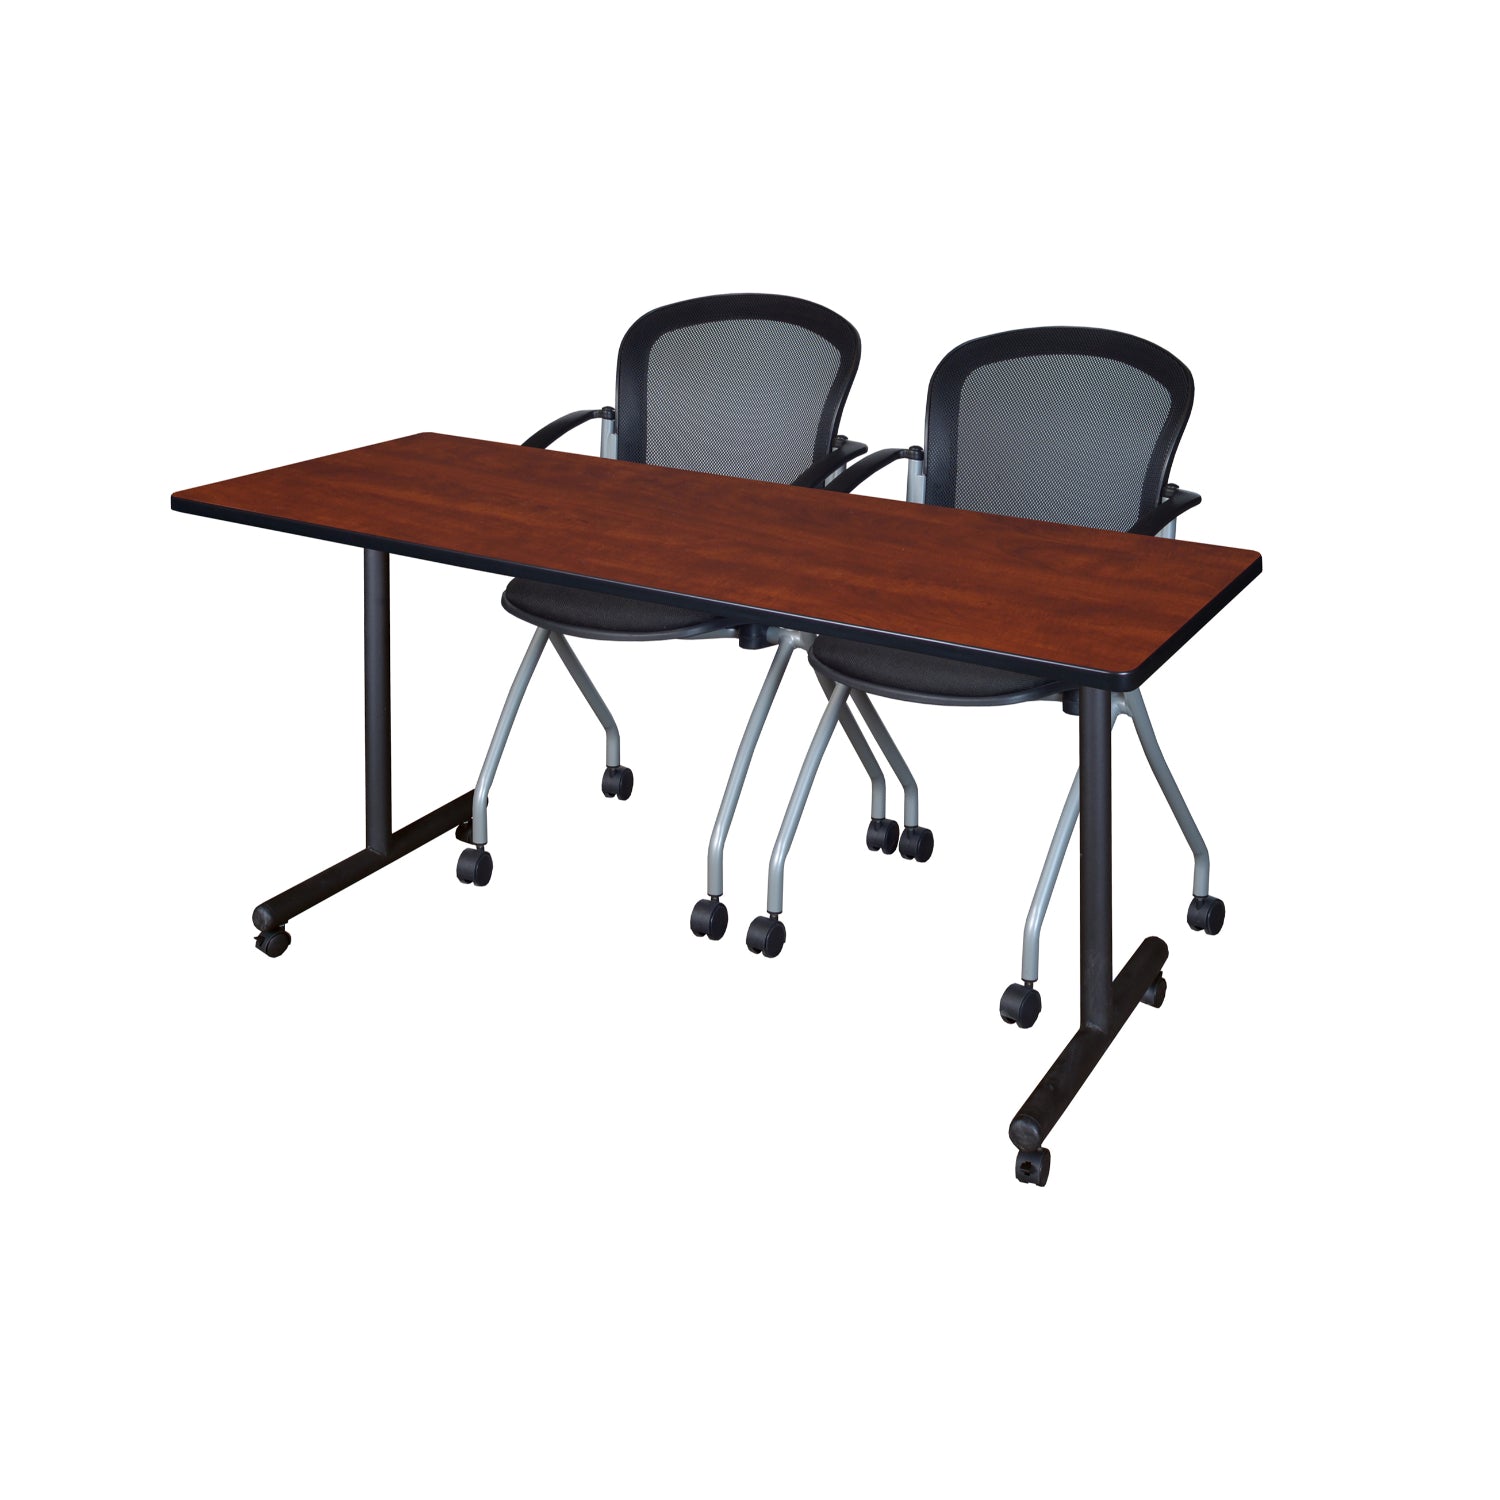 Kobe Mobile Training Table and Chair Package, Kobe 60" x 24" Mobile T-Base Training/Seminar Table with 2 Cadence Nesting Chairs